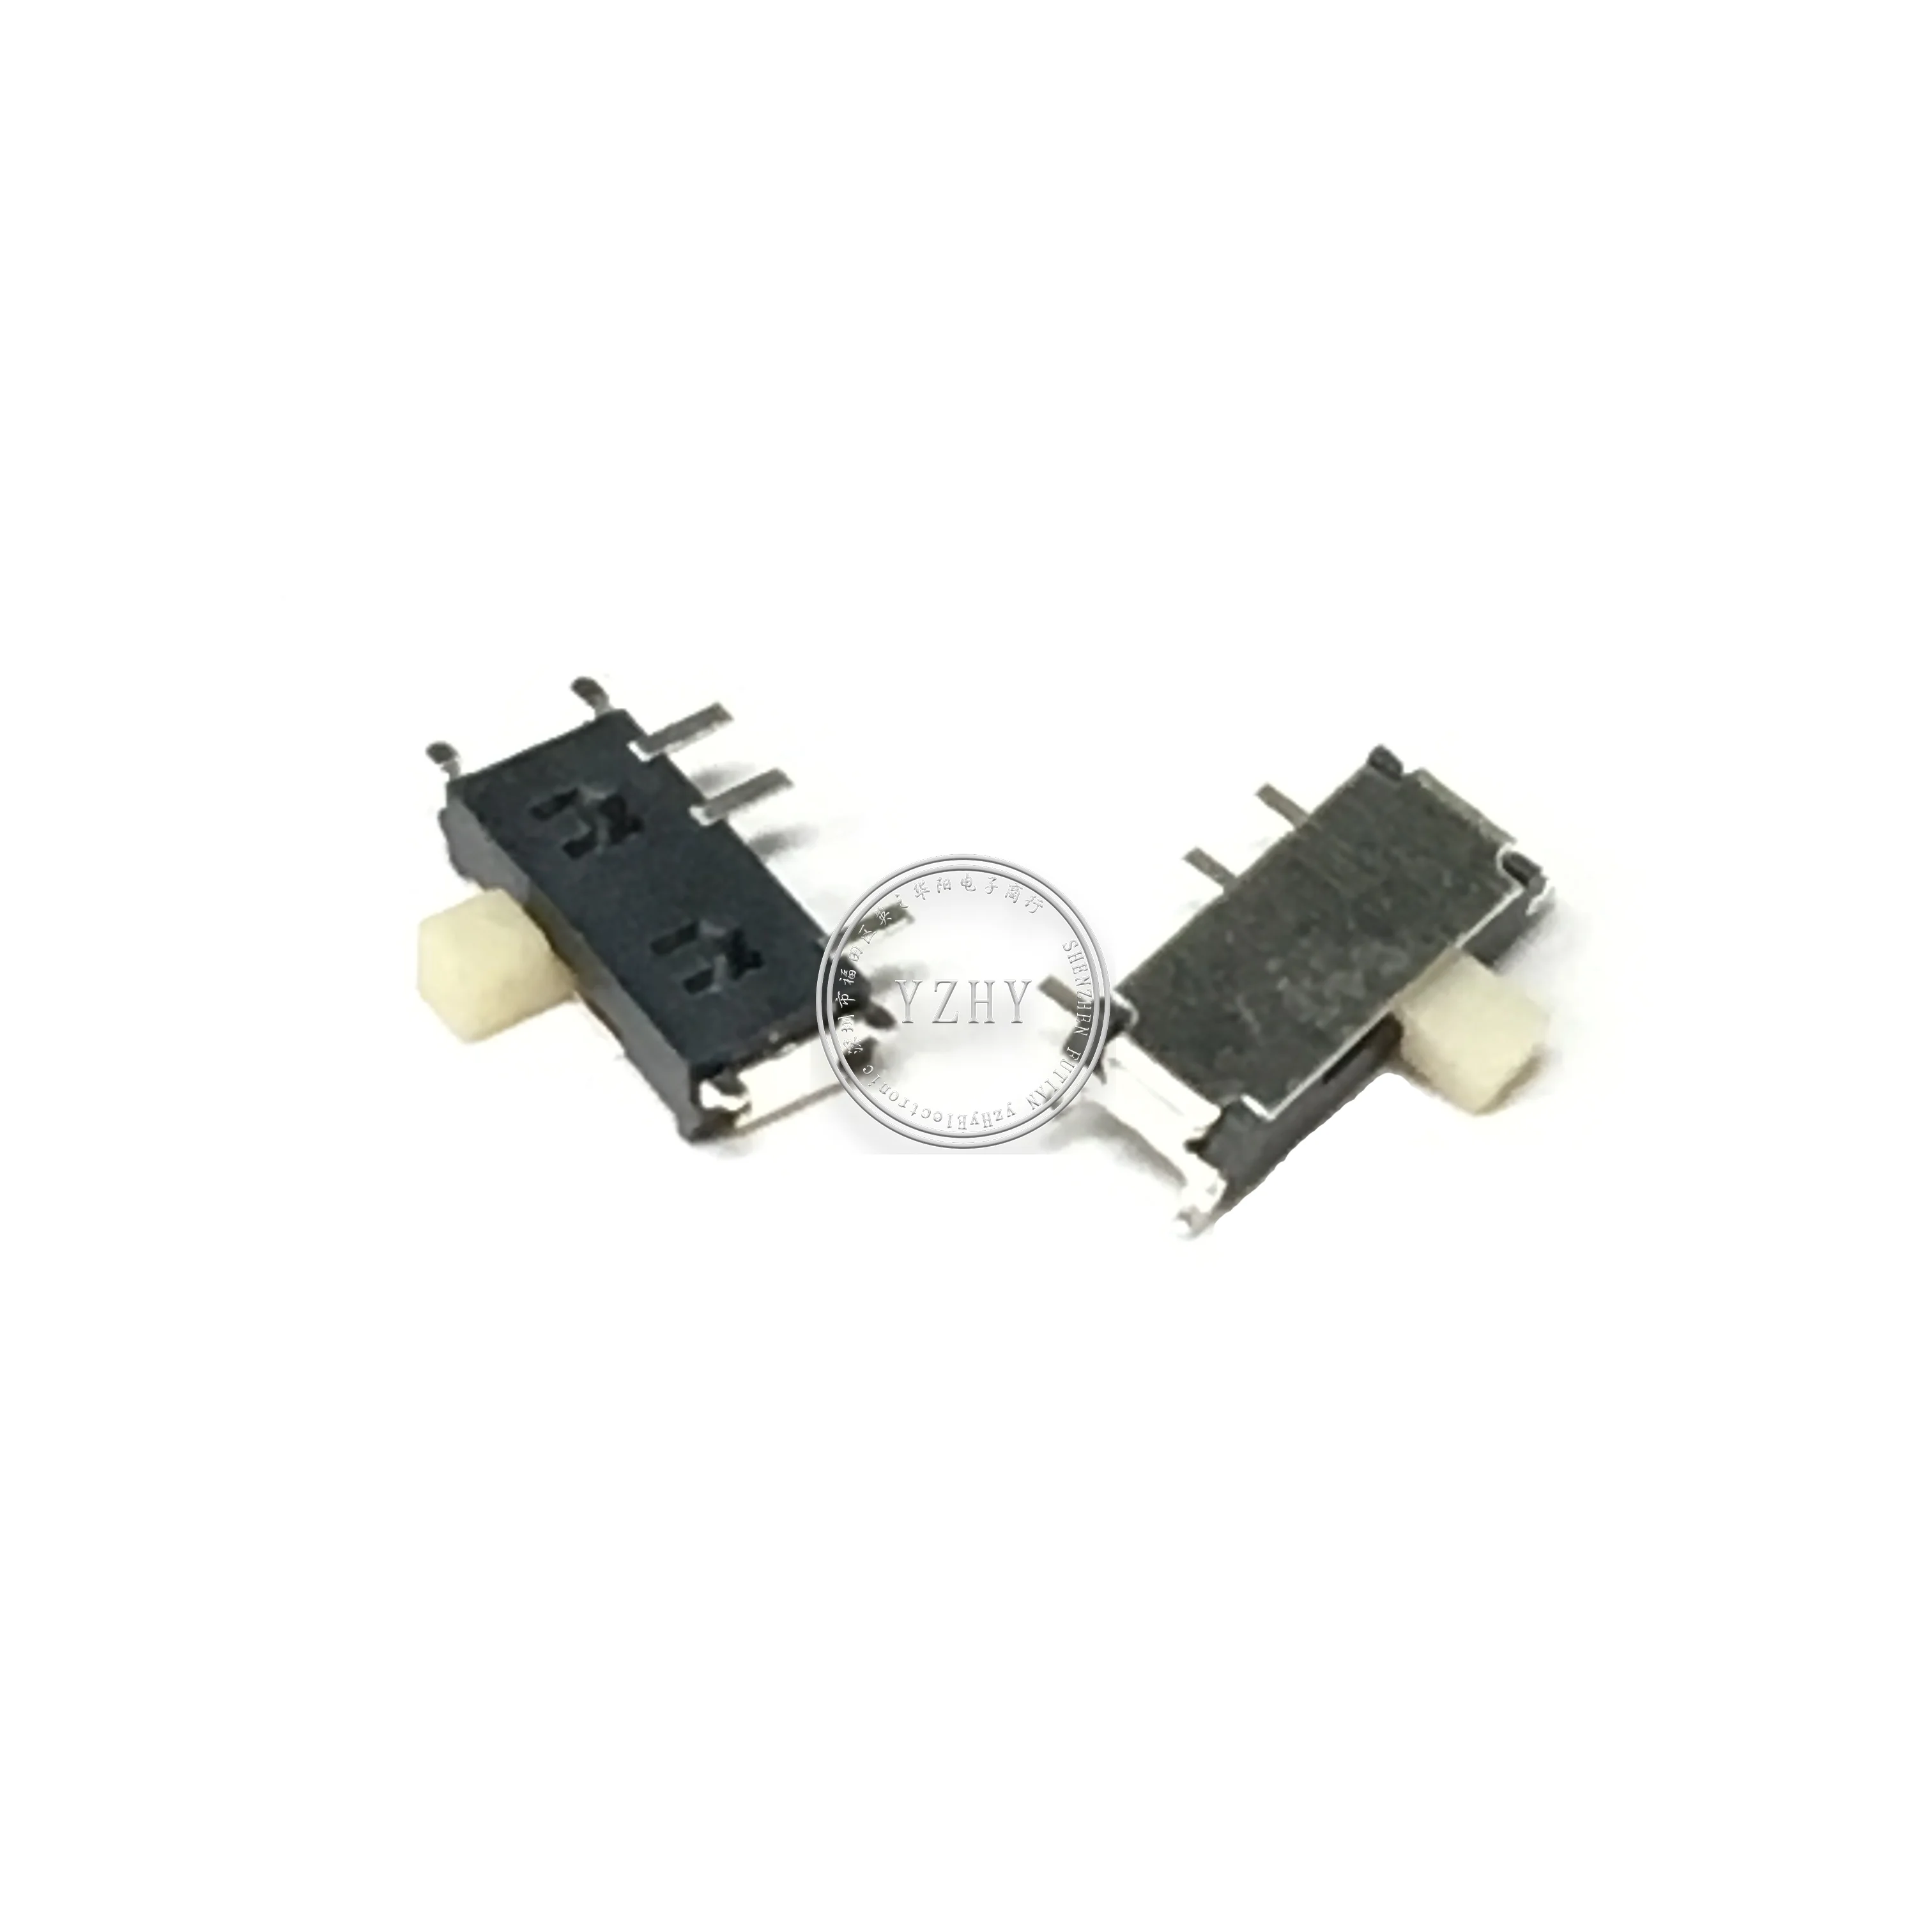 

50pcs orginal new MSK-12C02 Seven-pin toggle switch SMD 7-pin 2-speed side-dial MP3/MP4 slide 7P